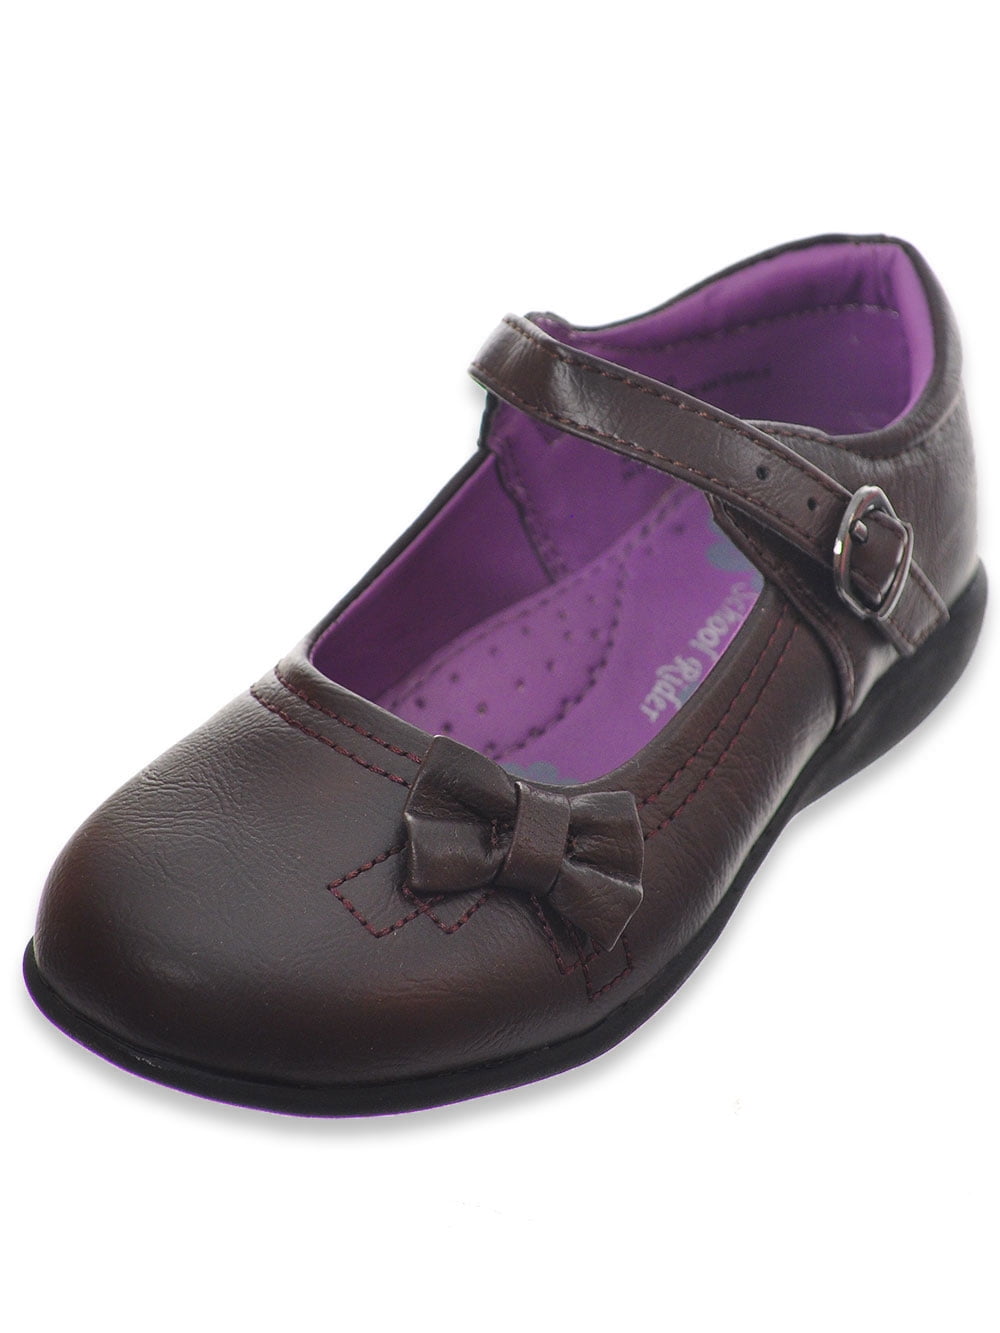 mary jane shoes for girls